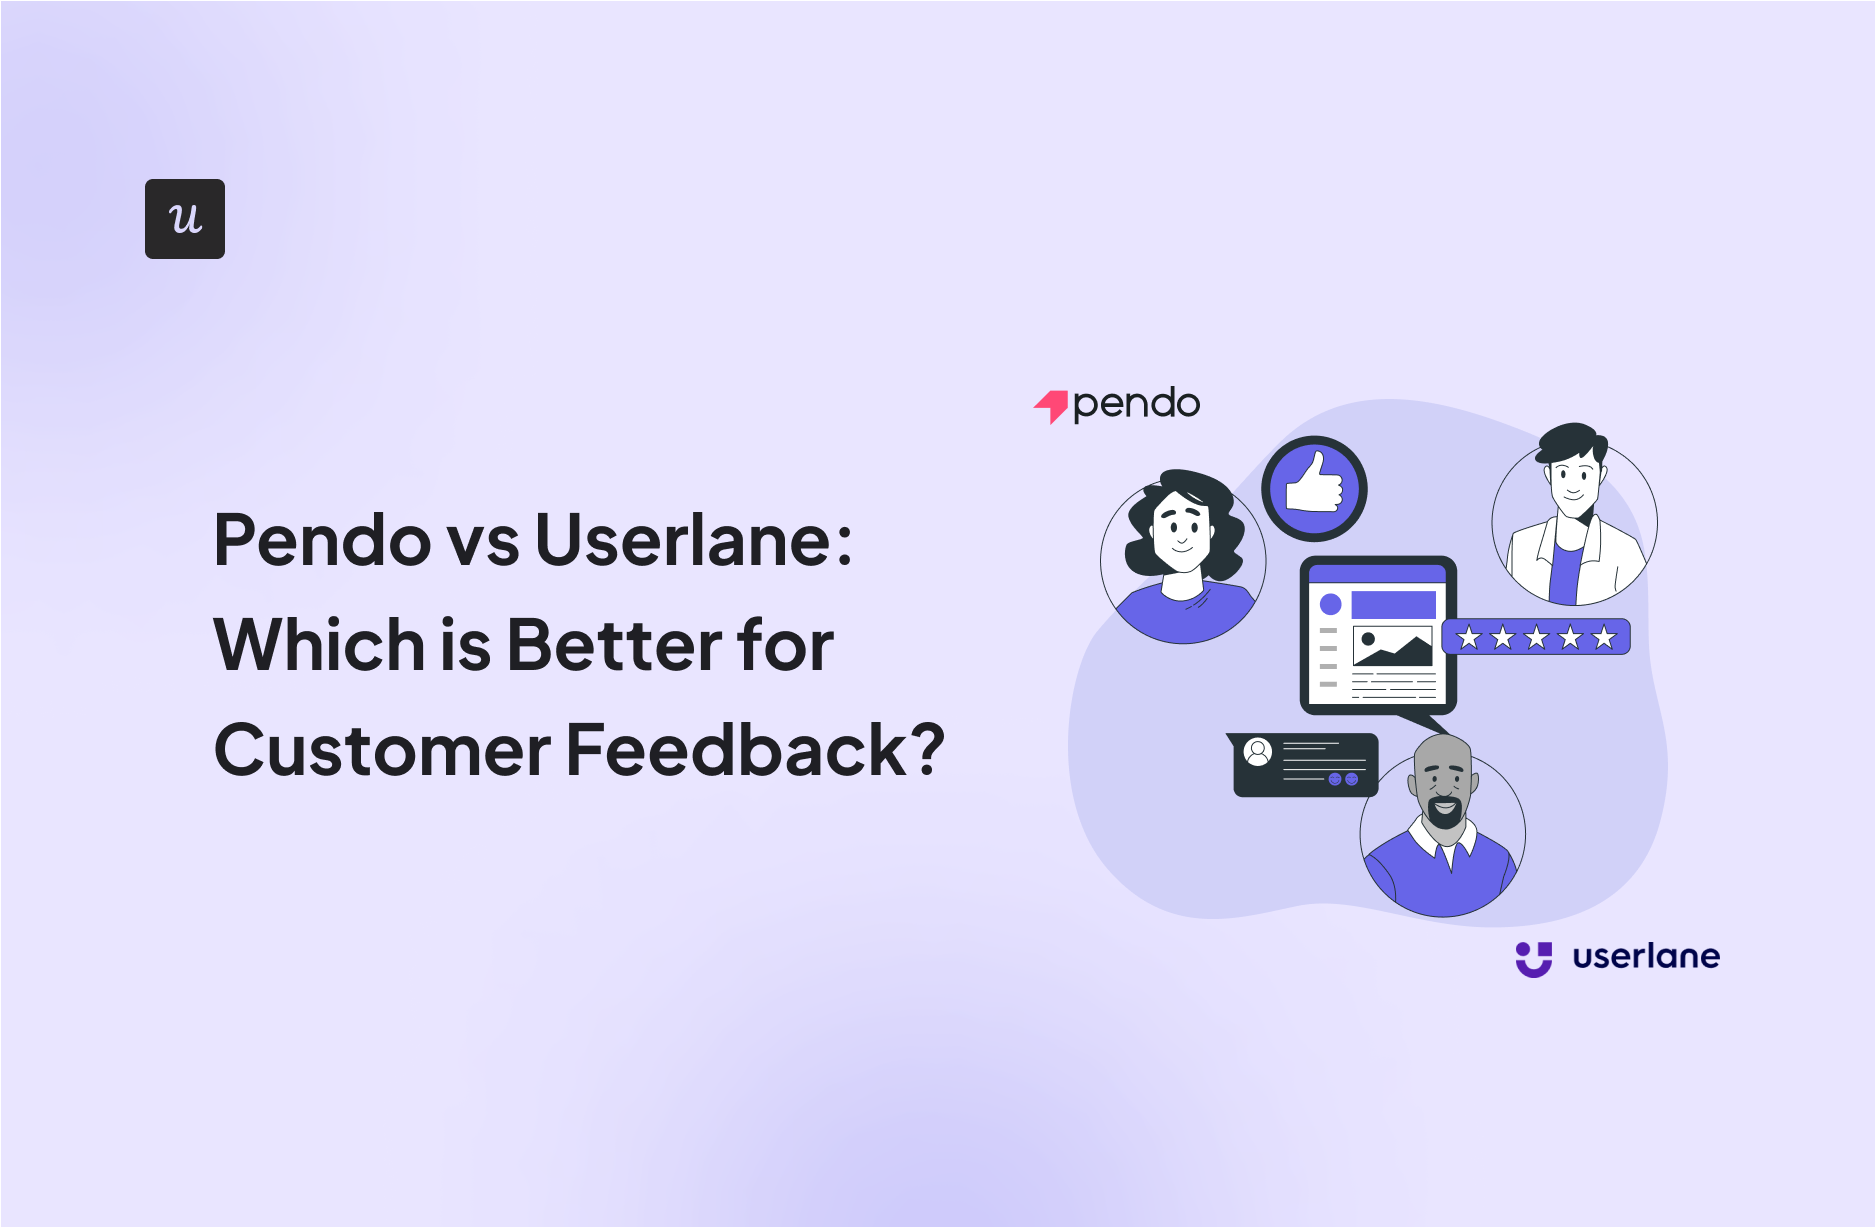 Pendo vs Userlane: Which is Better for Customer Feedback?